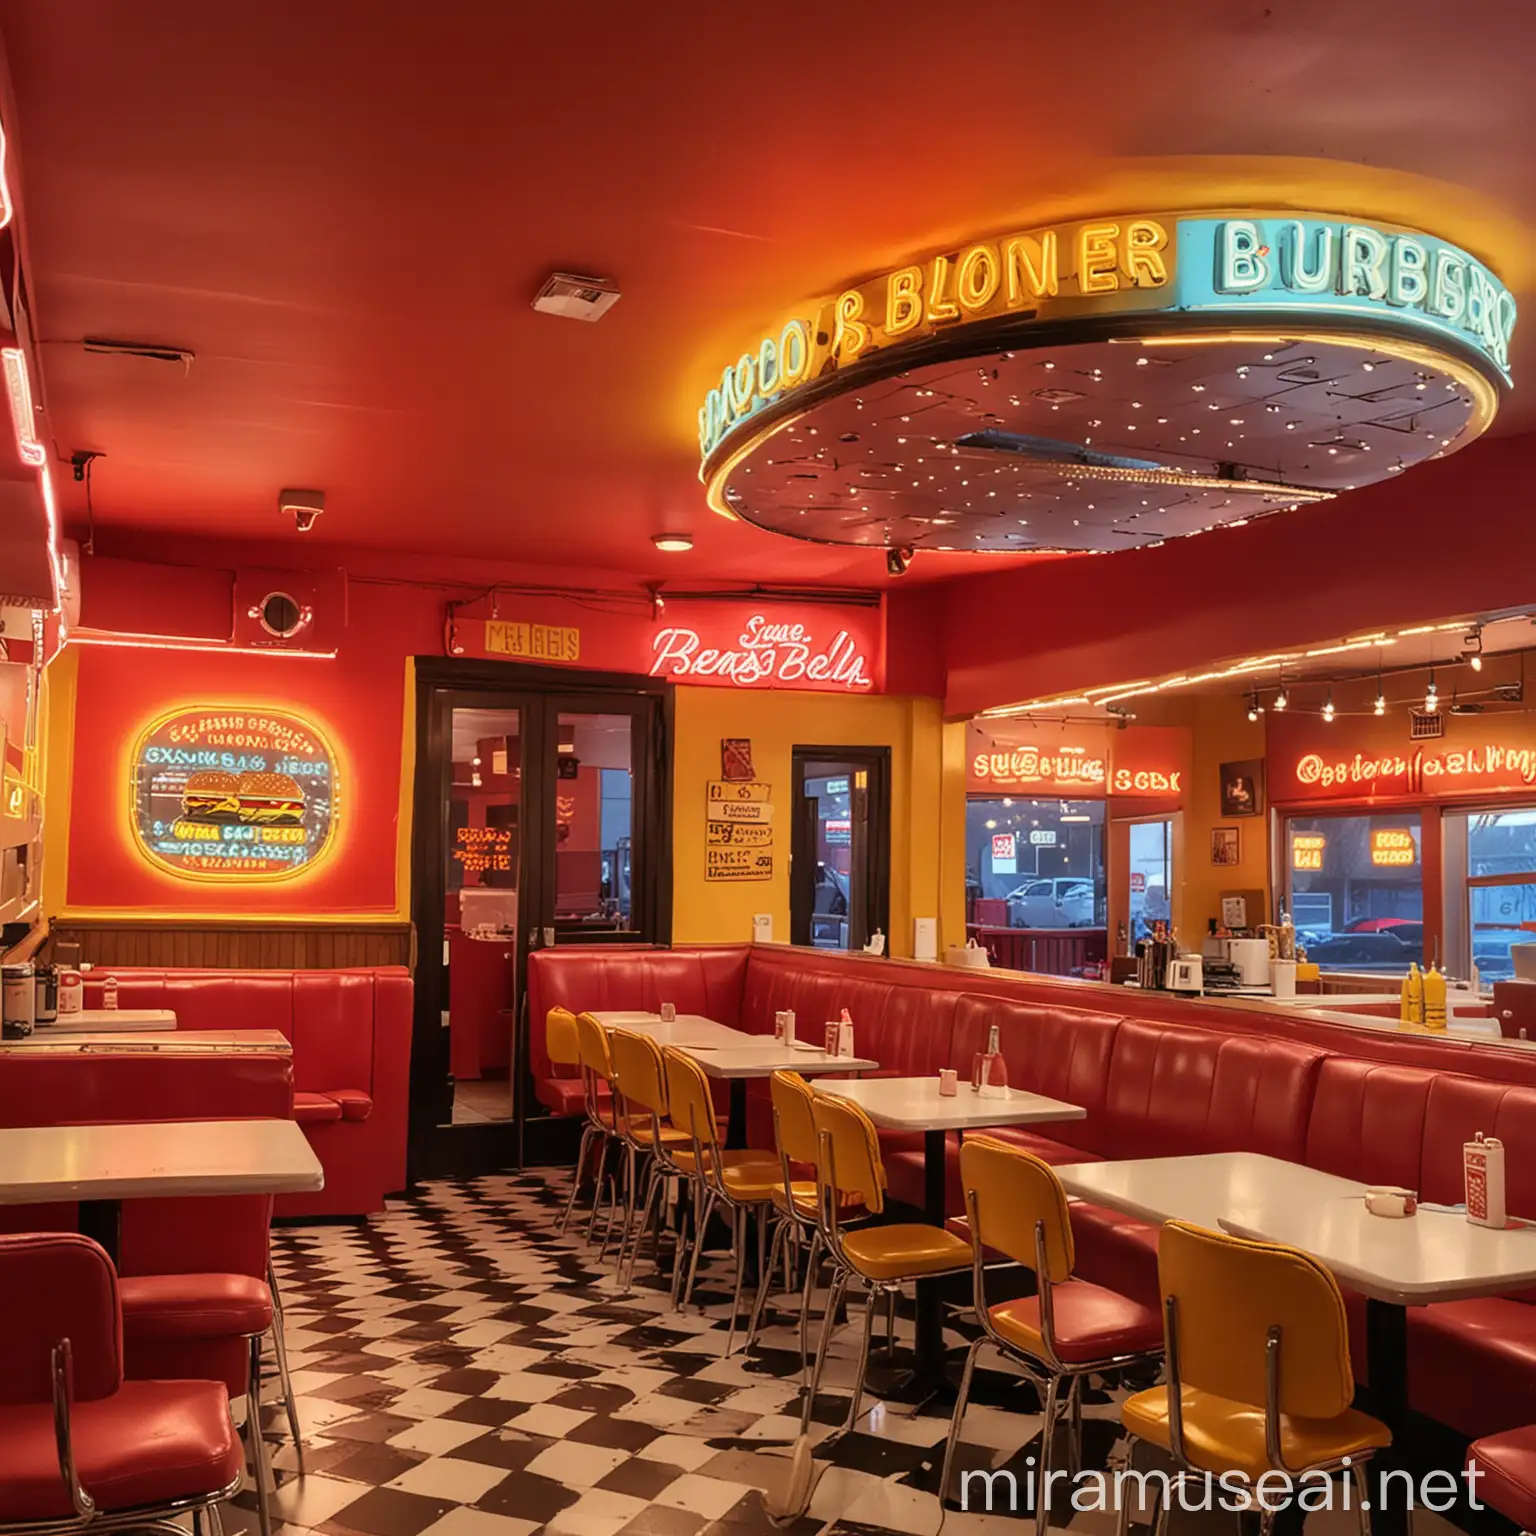 Inside of detailed 90’s retro red and yellow burger restaurant with neon lights like saved by the bells famous restaurant “The max”